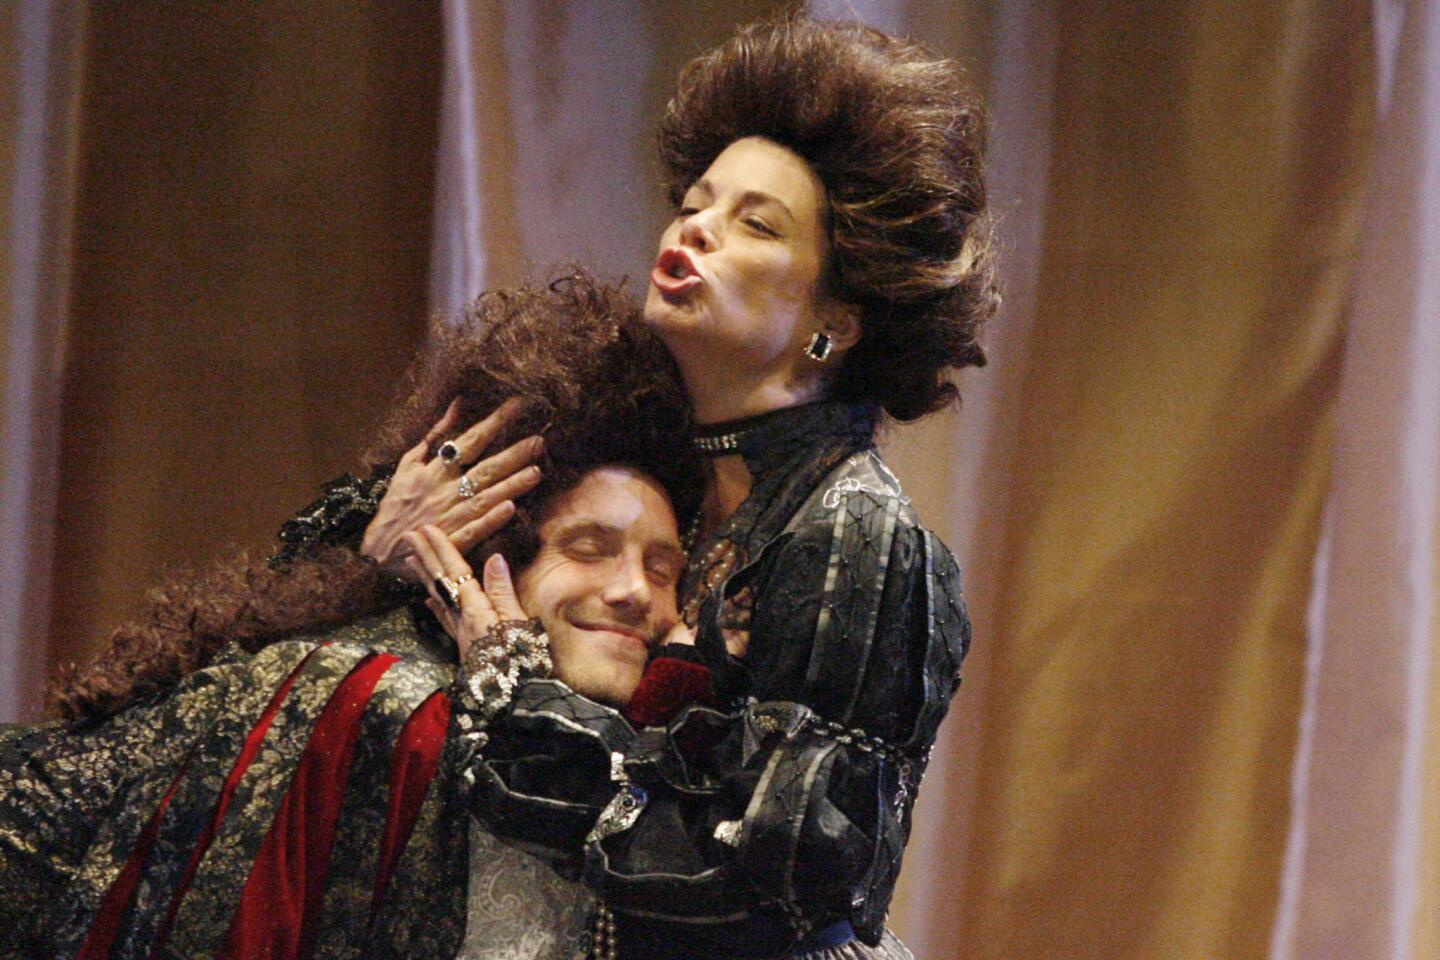 Actor Adam Haas Hunter, bottom, is embraced by Francia DiMase during a rehearsal for Cymbeline, which took place at A Noise Within in Pasadena on Thursday, September 20, 2012.